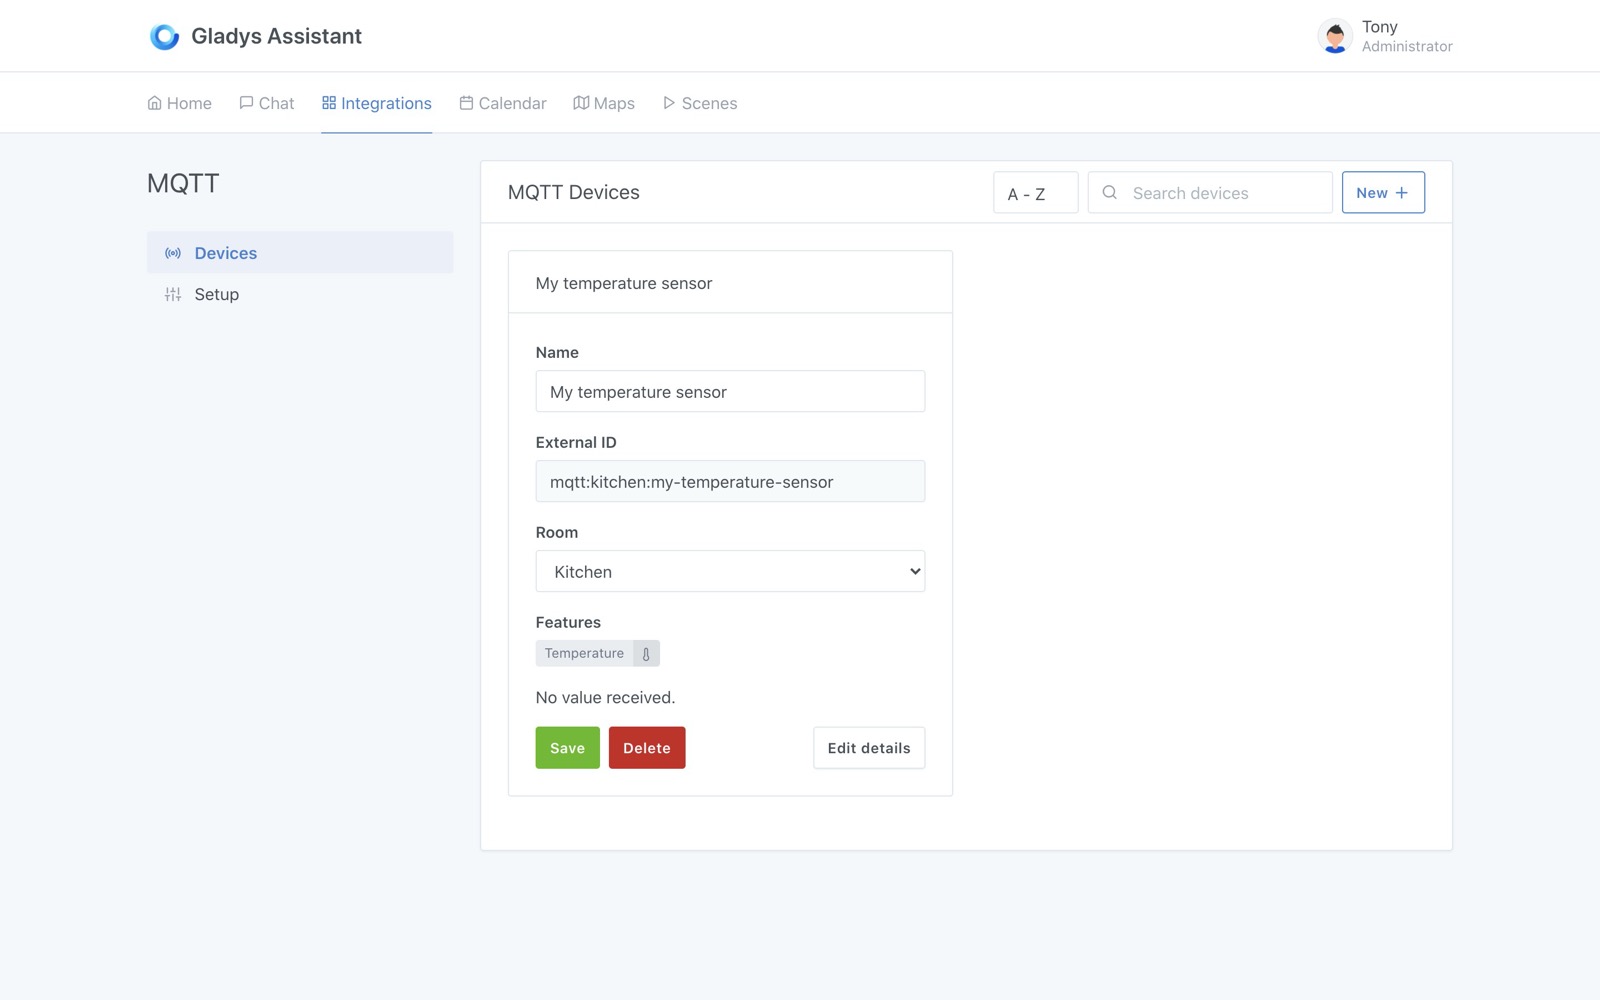 Create a MQTT device in Gladys Assistant